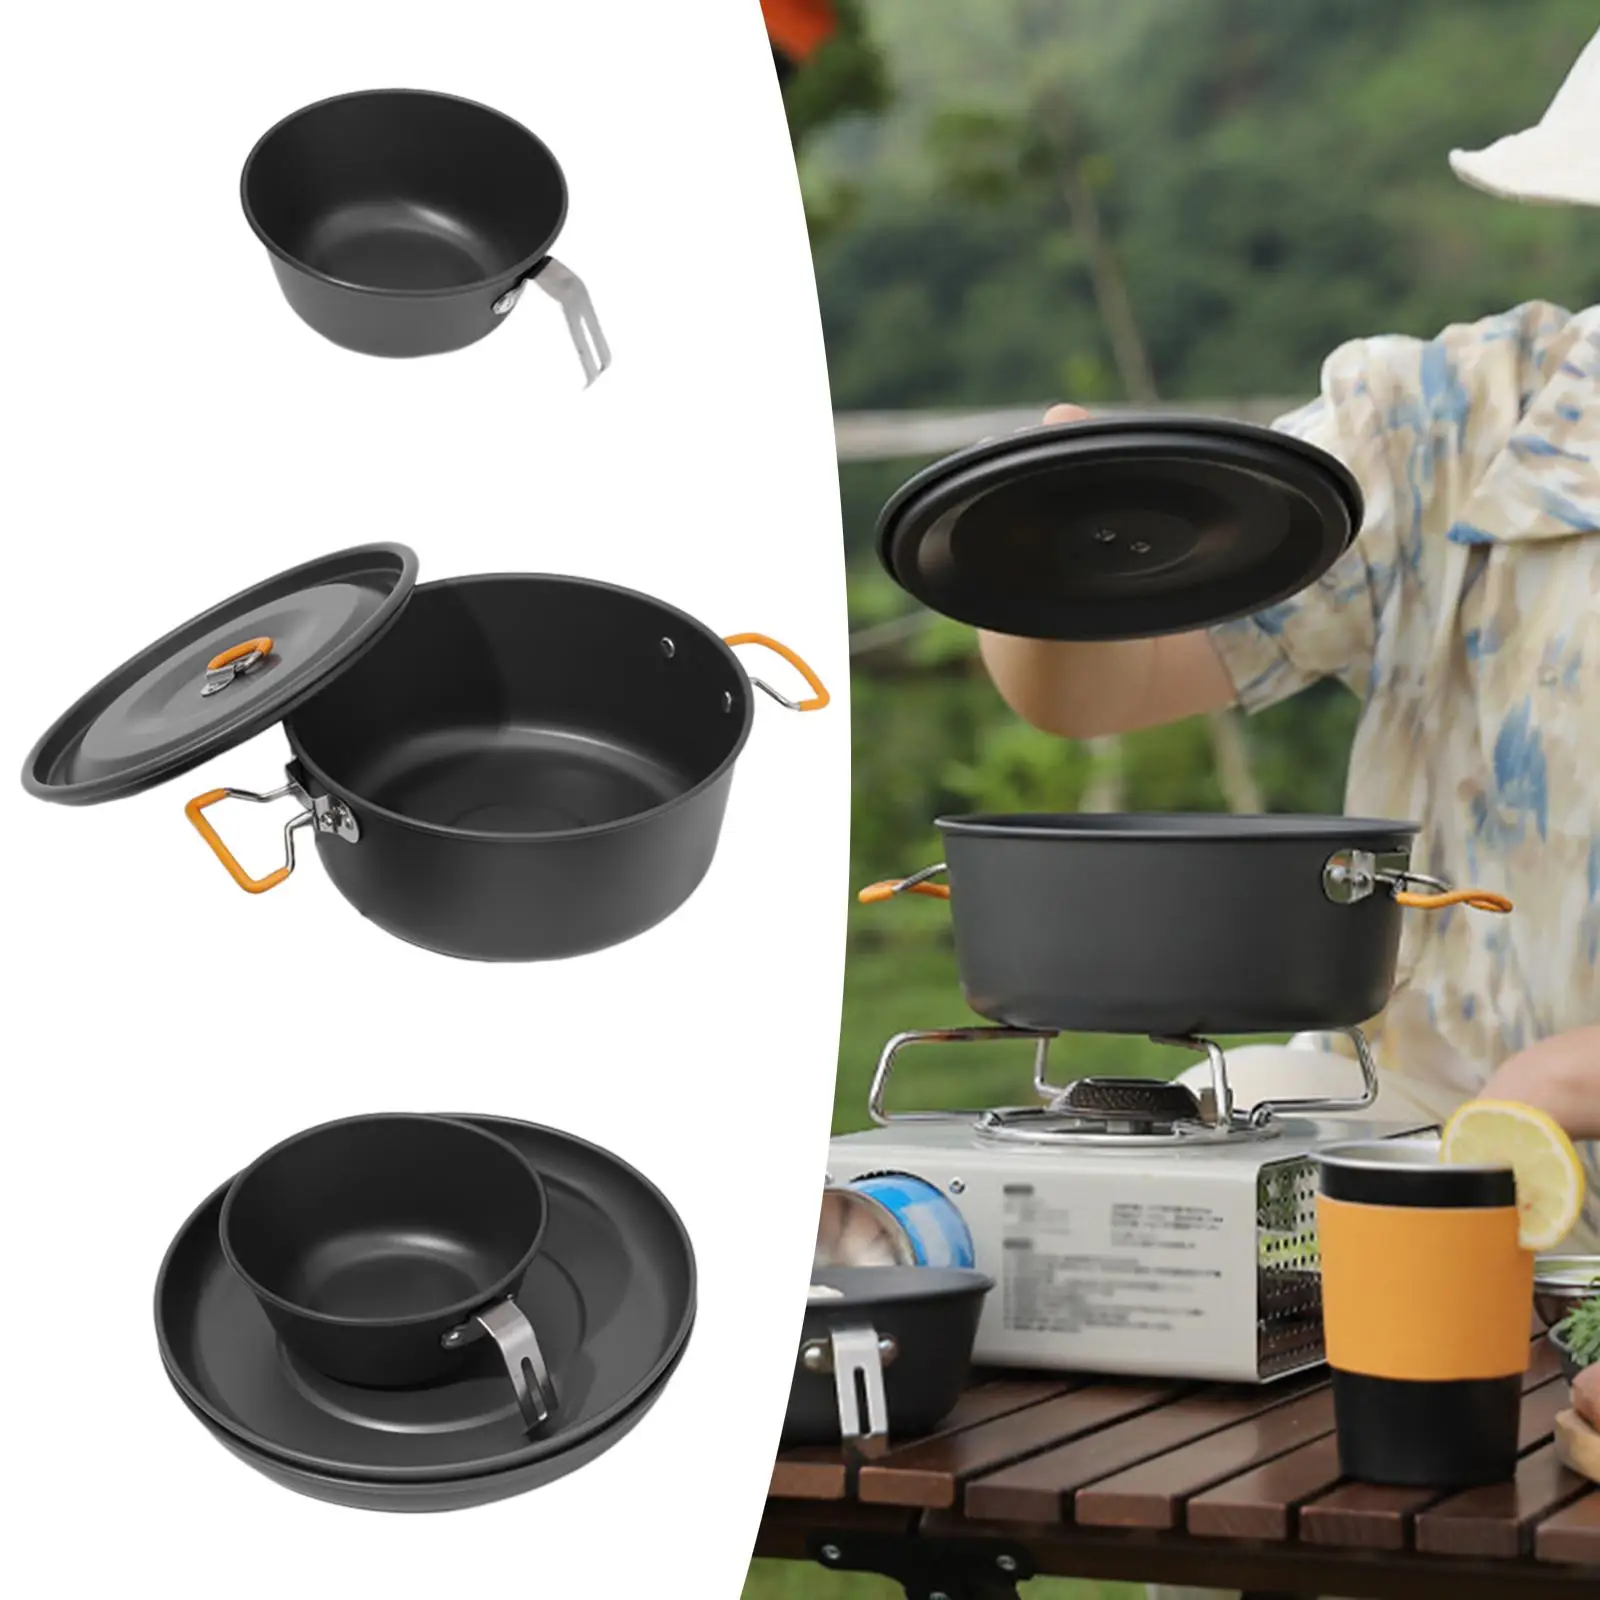 Camping Cookware Set Accessories Portable Cooking Cookware Outdoor Pot Tableware Kit for Hiking Outdoor Survival Dinner Travel